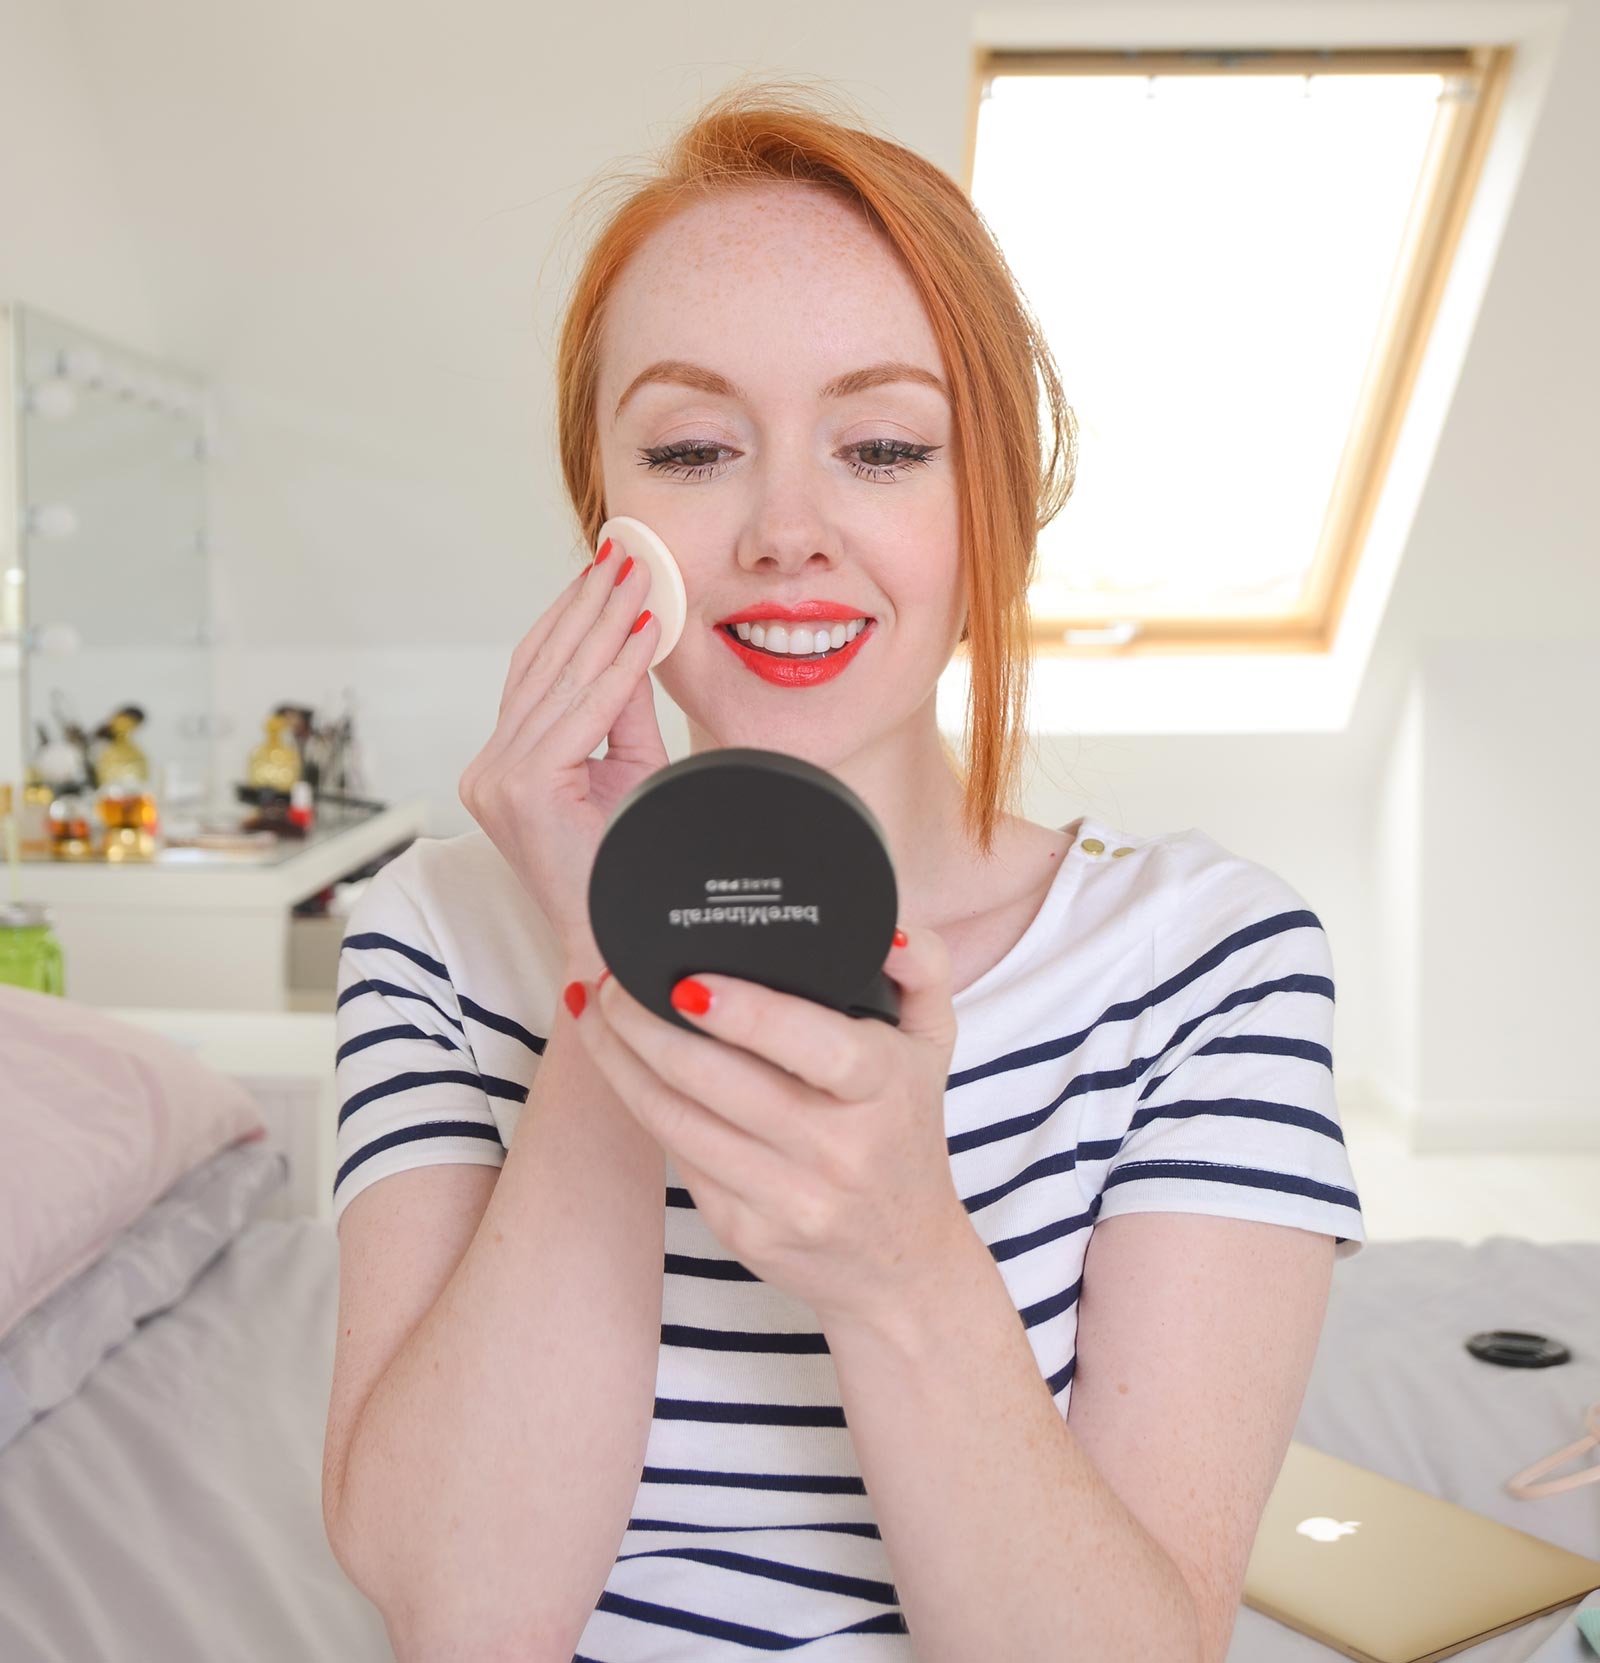 pale skinned beauty blogger Forever Amber reviews BarePRO powder foundation from Bare Minerals